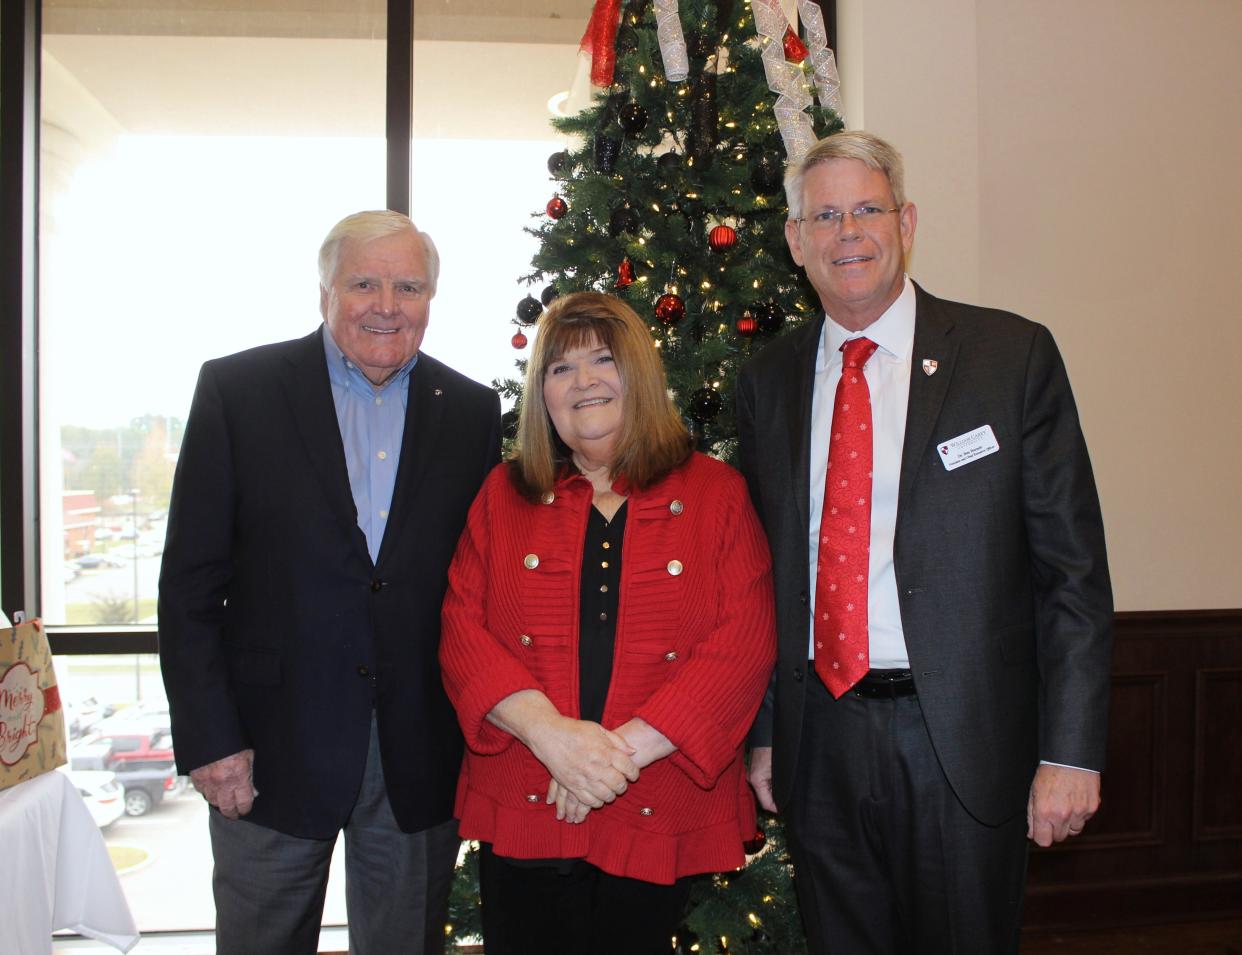 The Asbury Foundation has awarded a $7 million grant to the William Carey University College of Health Sciences. Pictured from left are William Ray, president and CEO of the Asbury Foundation; Janet Williams, WCU vice president of health sciences; and WCU President Ben Burnett.